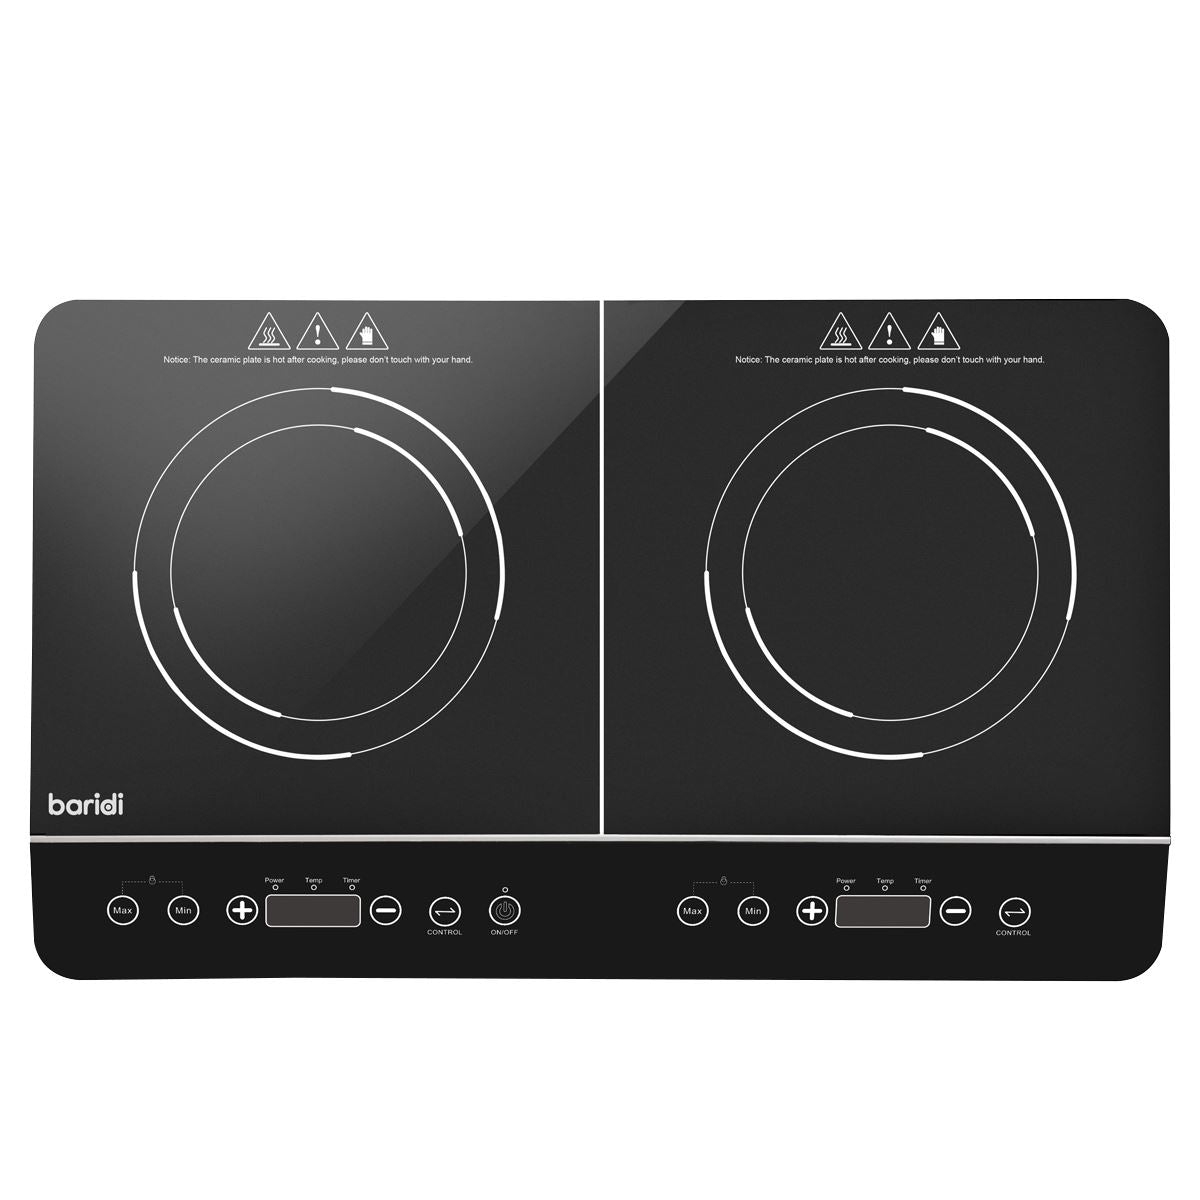 Baridi Portable Induction Hob: Two Zone Cooktop with 13A Plug, 2800W, 10 Power Settings, Touch Controls, 3-Hour Timer Function, Child Safety Lock, Black